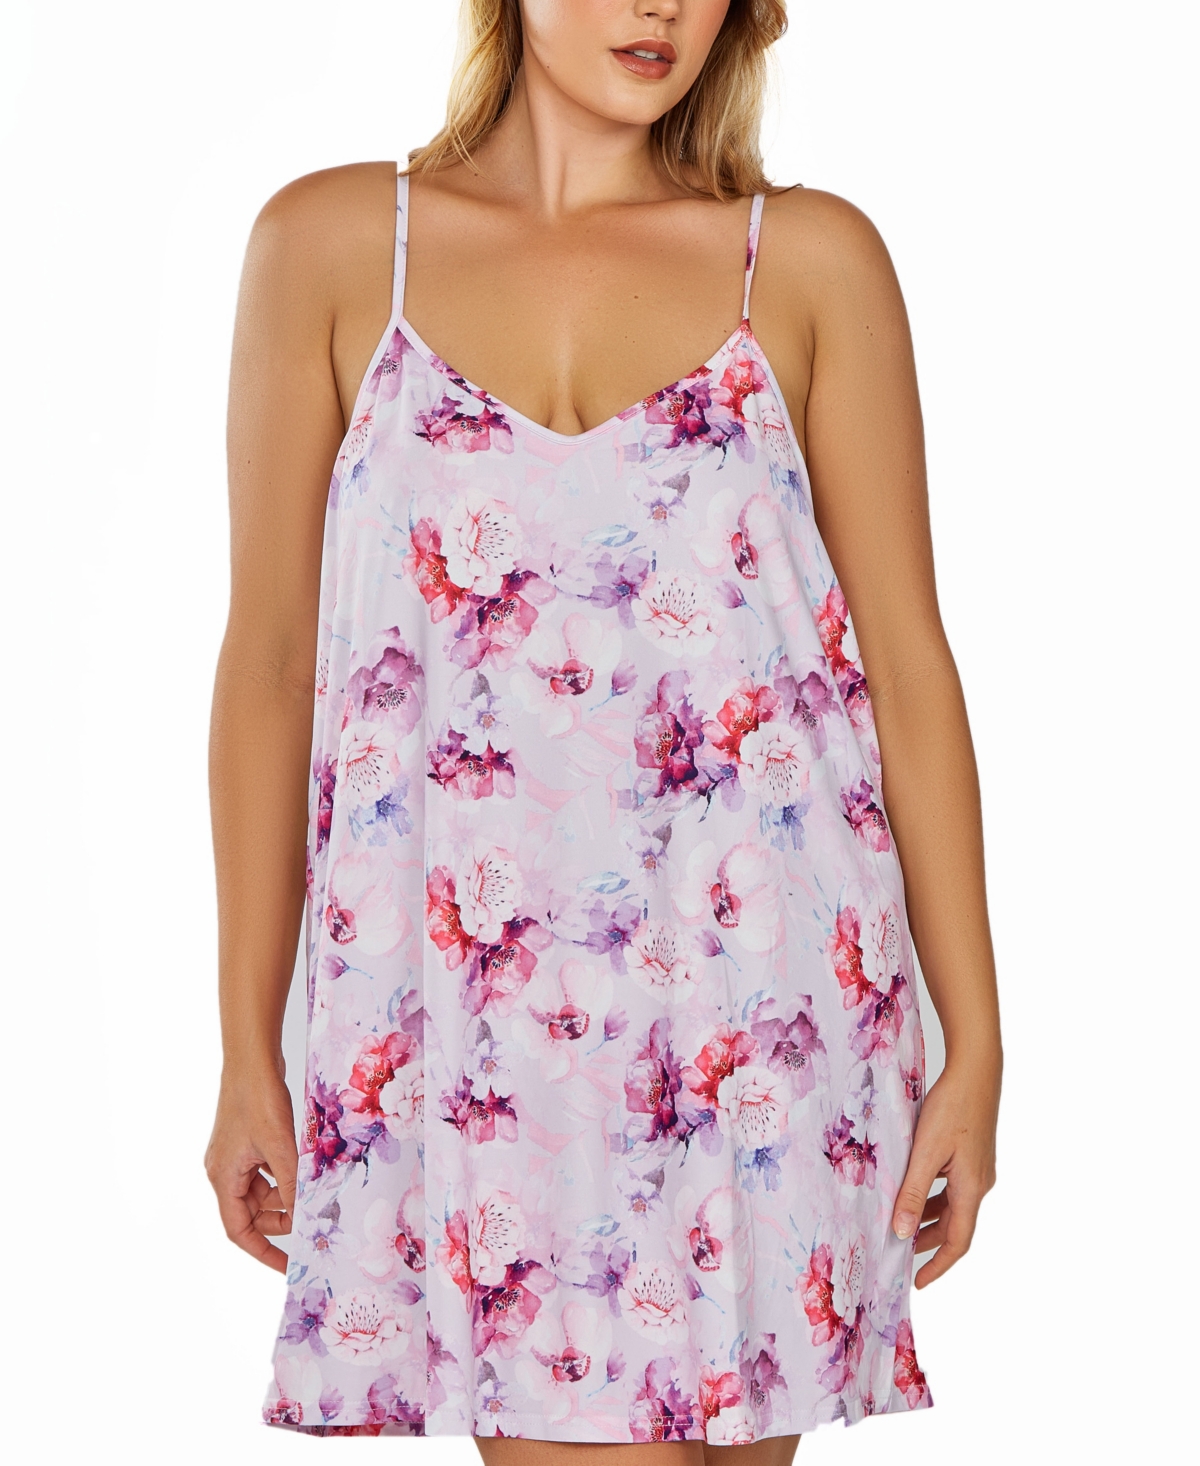 Plus Size 1Pc. Soft Brushed Nightgown Printed in All Over Floral - Purple